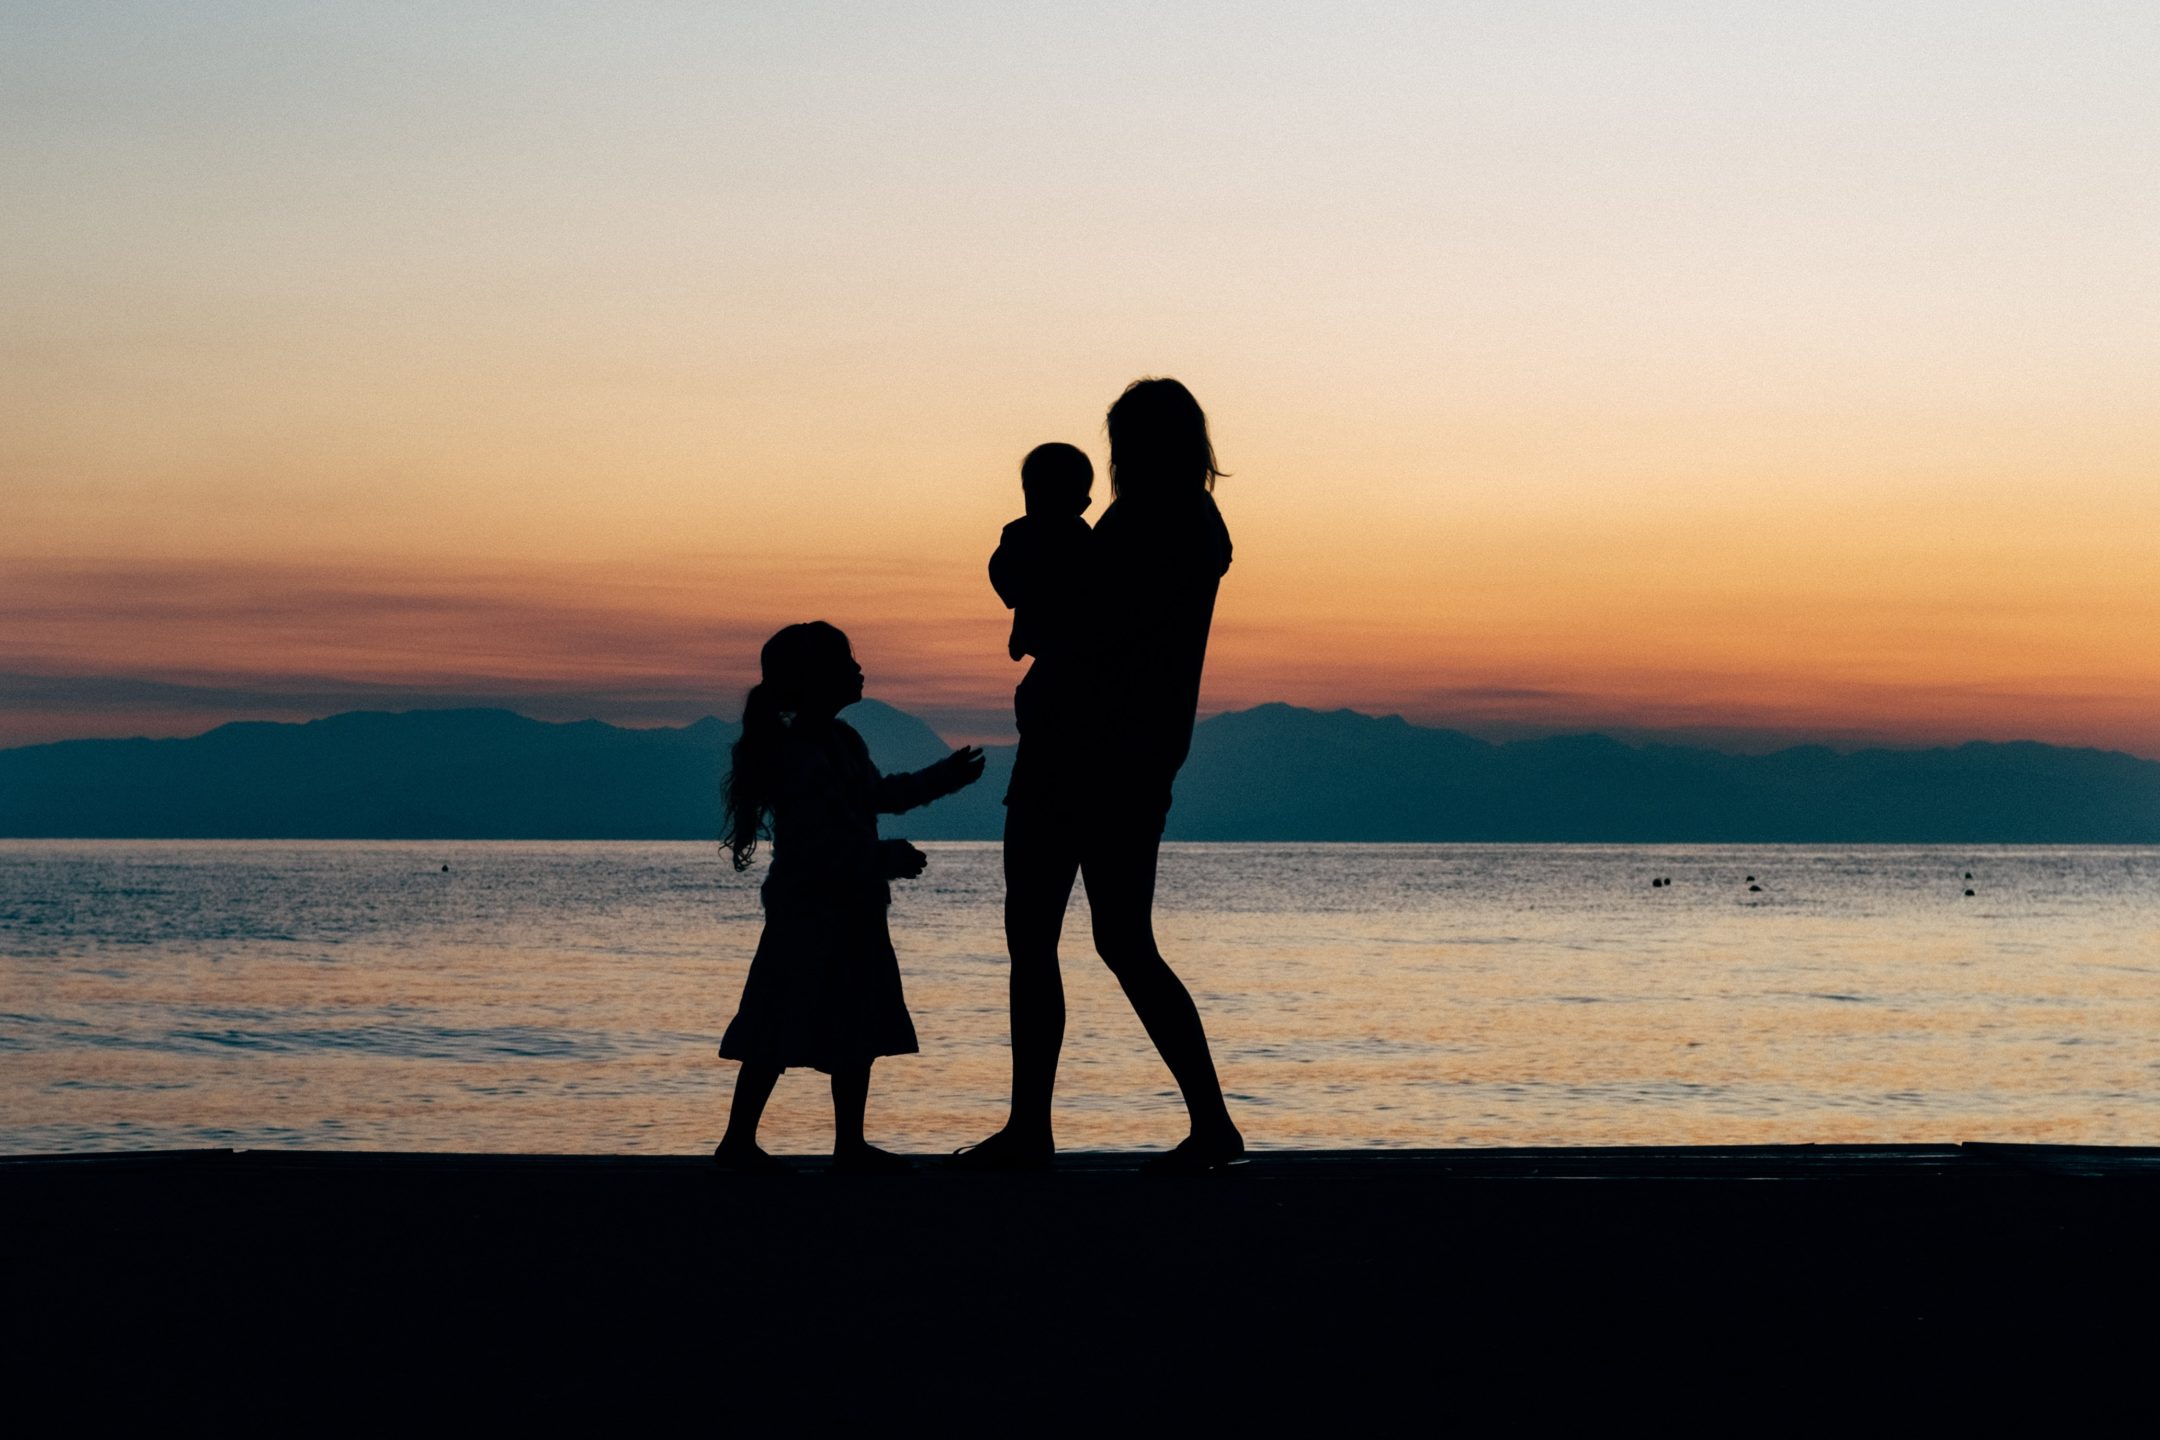 Silhouette of mother, baby and young child on beach at sunset